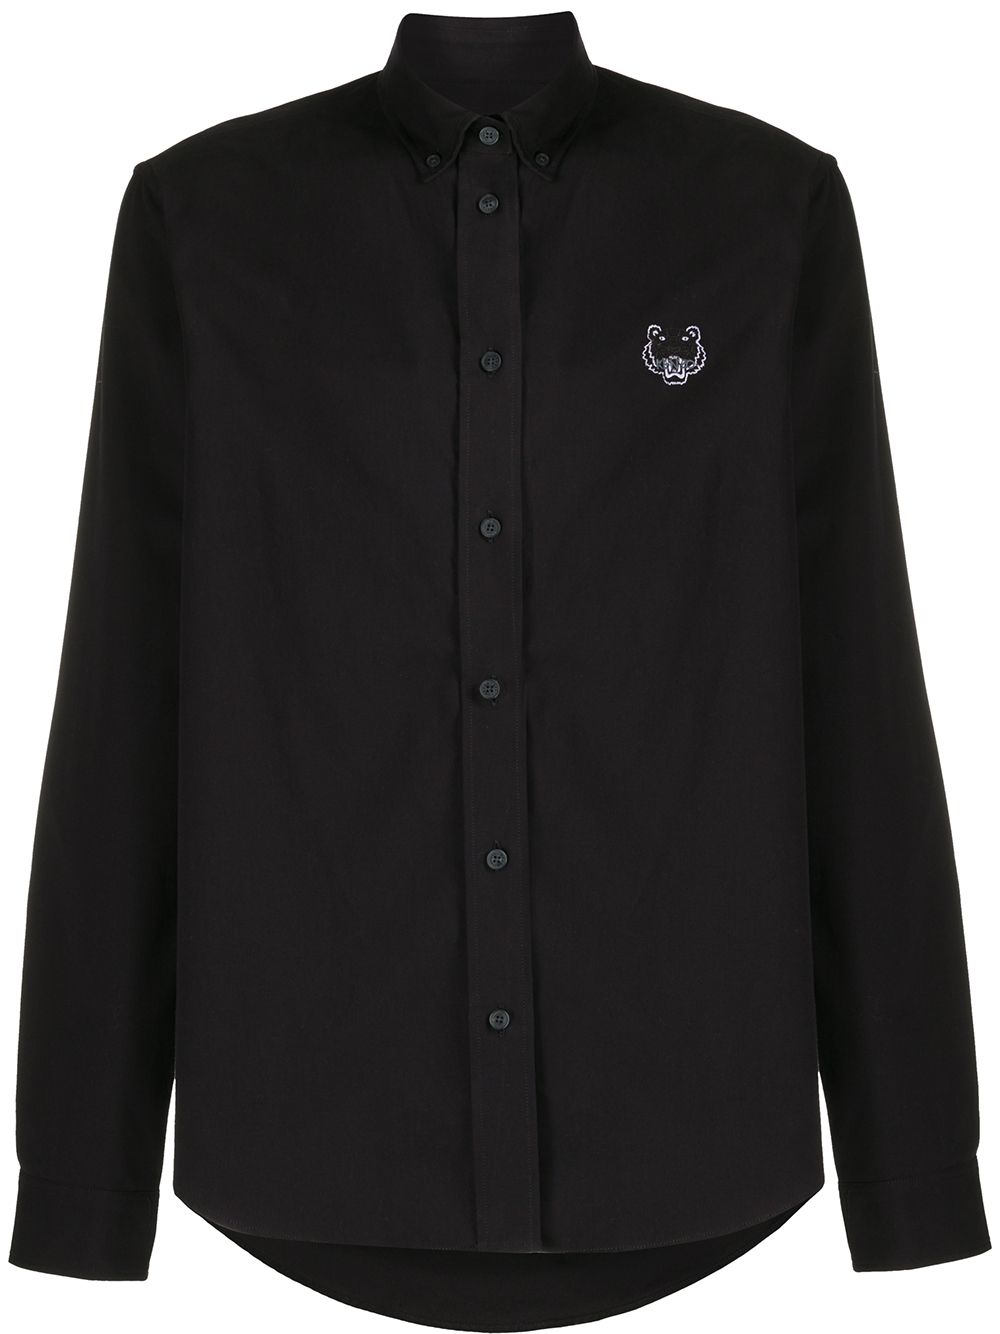 KENZO TIGER CREST CASUAL FIT SHIRT